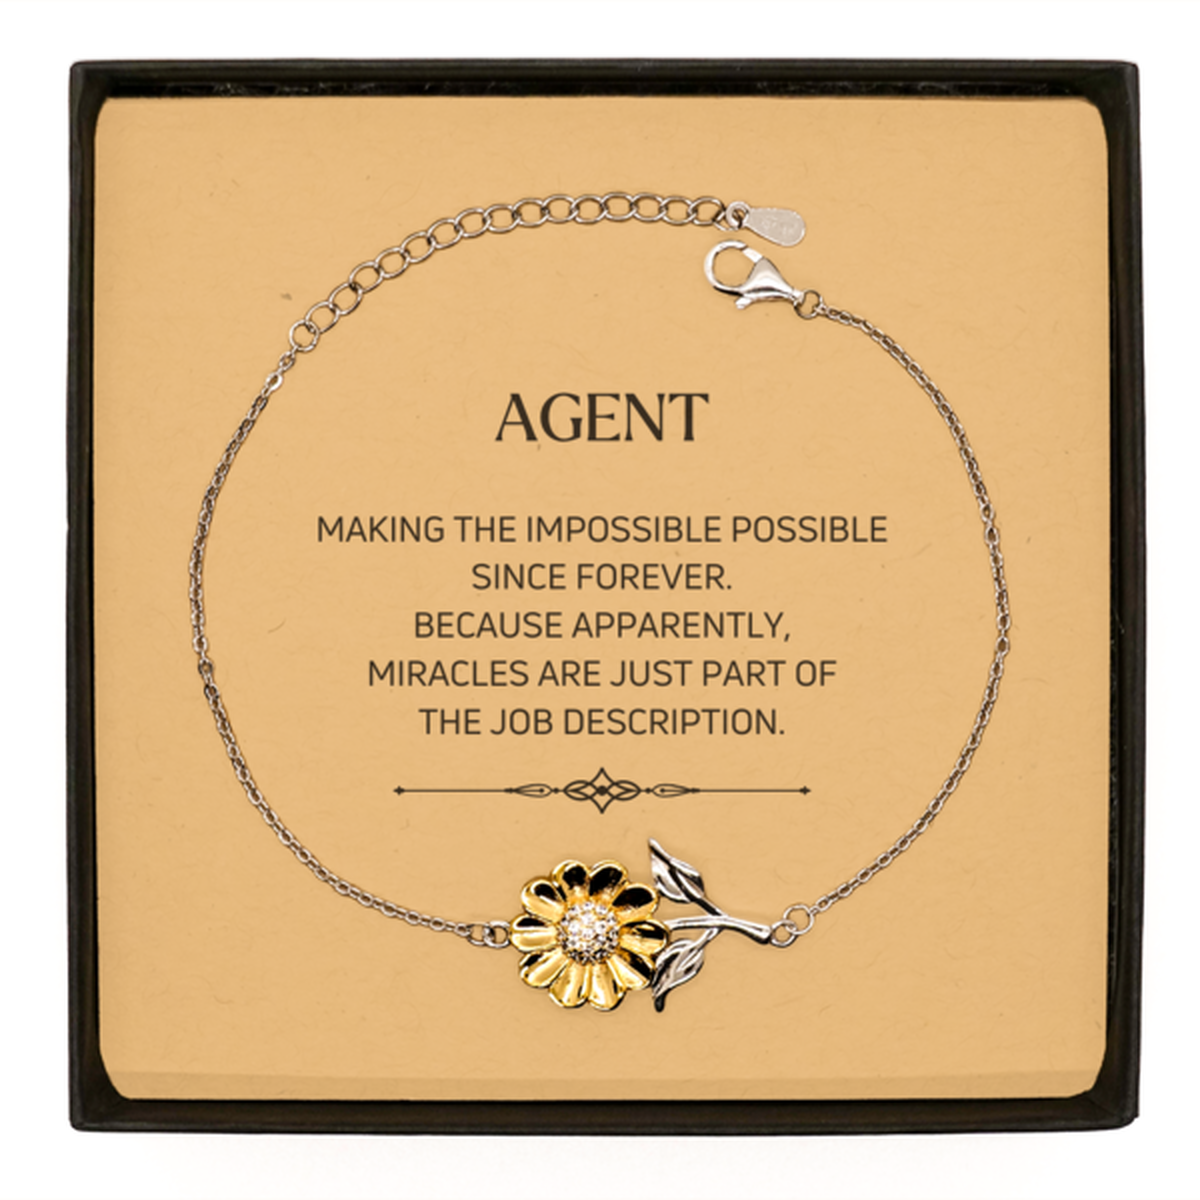 Funny Agent Gifts, Miracles are just part of the job description, Inspirational Birthday Sunflower Bracelet For Agent, Men, Women, Coworkers, Friends, Boss